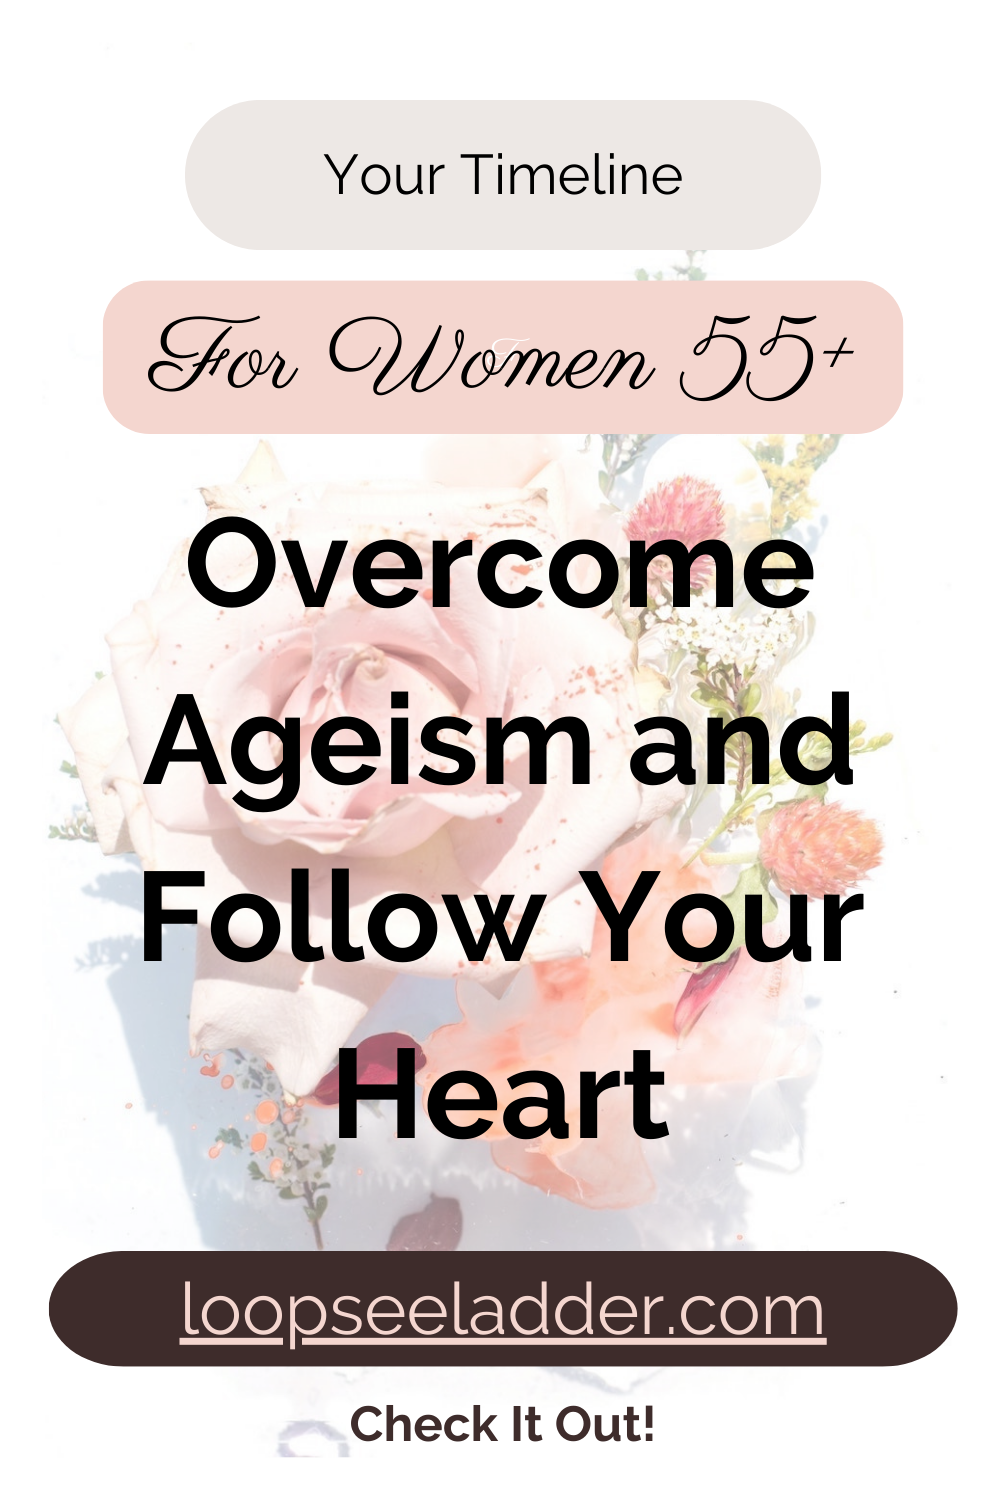 Age is Just a Number: How Women 55+ Can Overcome Ageism and Follow Their Hearts